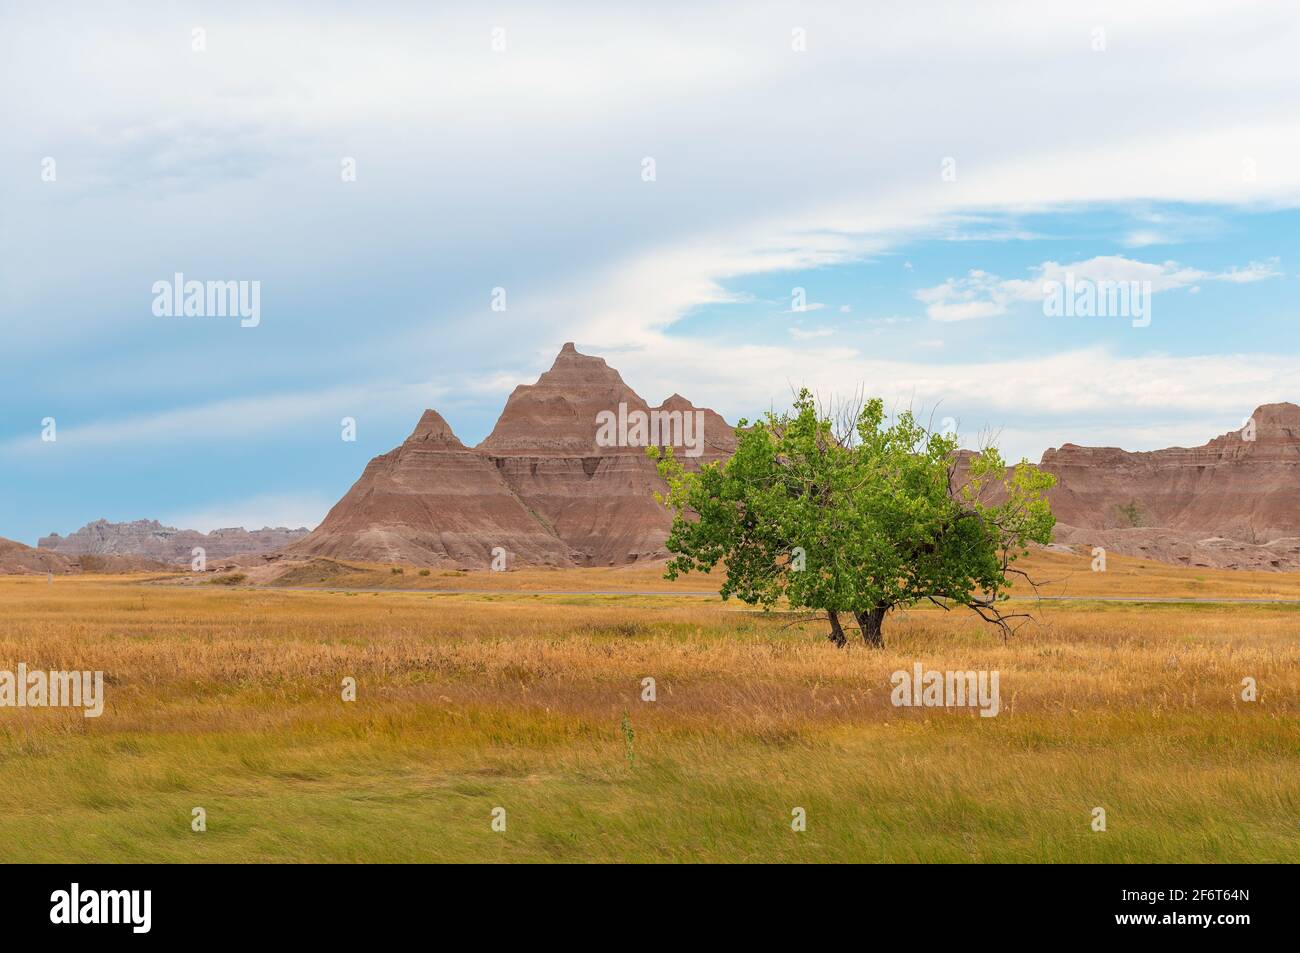 Lonesome tree in meadow with geological sandstone rock layers, Badlands national park, South Dakota, United States of America (USA). Stock Photo